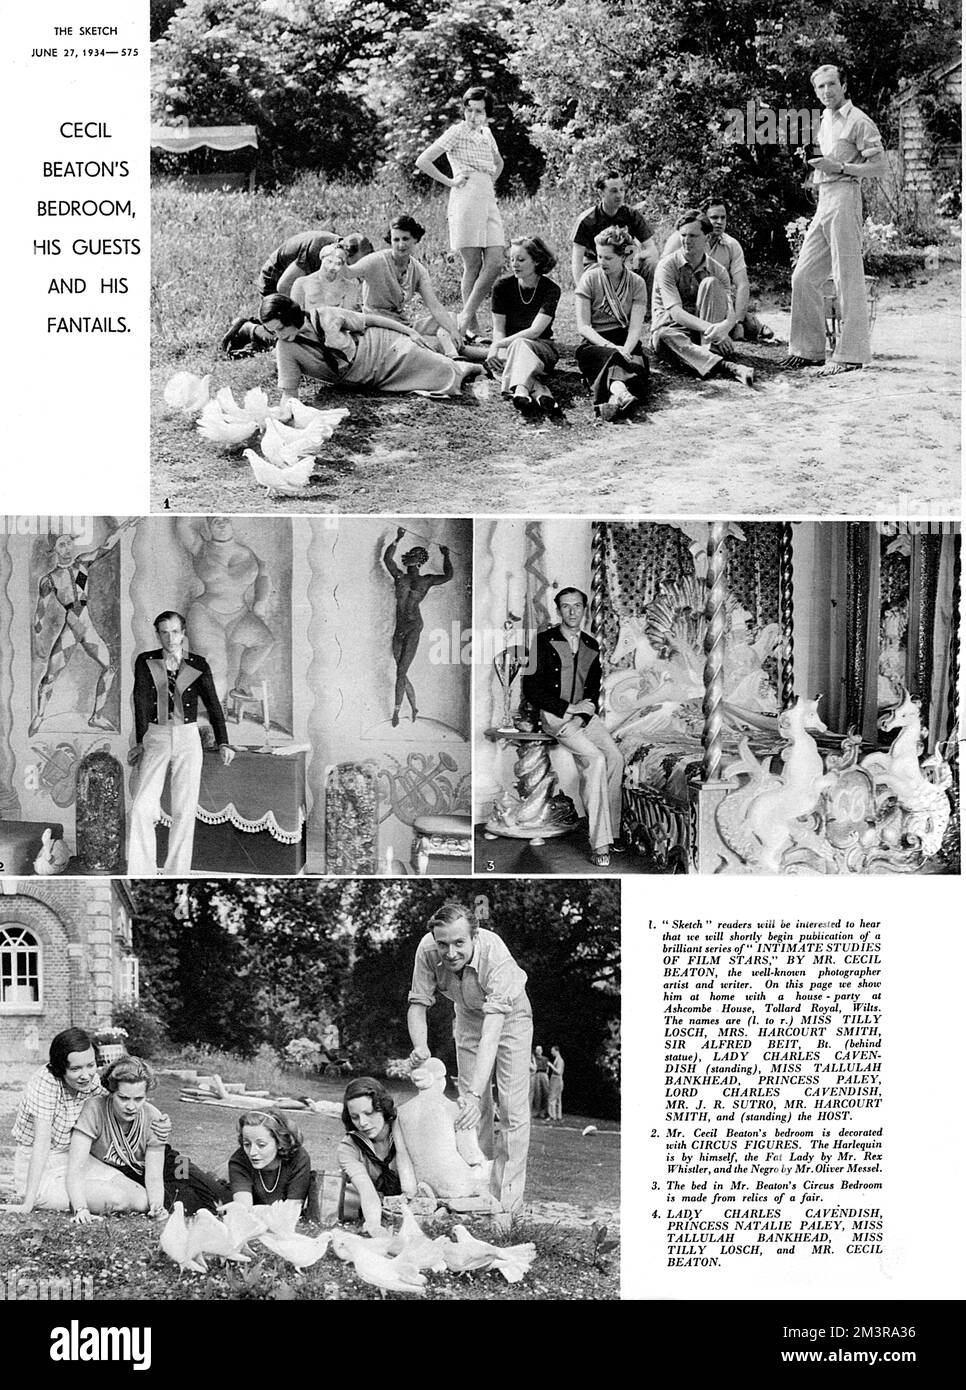 The top photograph shows Cecil Beaton at home with guests at Ashcombe House; from l-r: Miss Tilly Losch, Mrs Harcourt Smith, Sir Alfred Beit, Lady Charles Cavendish, Miss Tallulah Bankhead, Princess Paley, Lord Charles Cavendish, Mr J. R. Sutro, Mr Harcourt Smith and Cecil Beaton, the host. The middle two photographs show Beaton in his bedroom, surrounded by circus figures and next to his elaborate bed. The bottom photograph shows guests out in the garden- l-r: Lady Charles Cavendish. Princess Natalie Paley, Miss Tallulah Bankhead, Miss Tilly Losch and  Cecil Beaton himself.     Date: 1934 Stock Photo